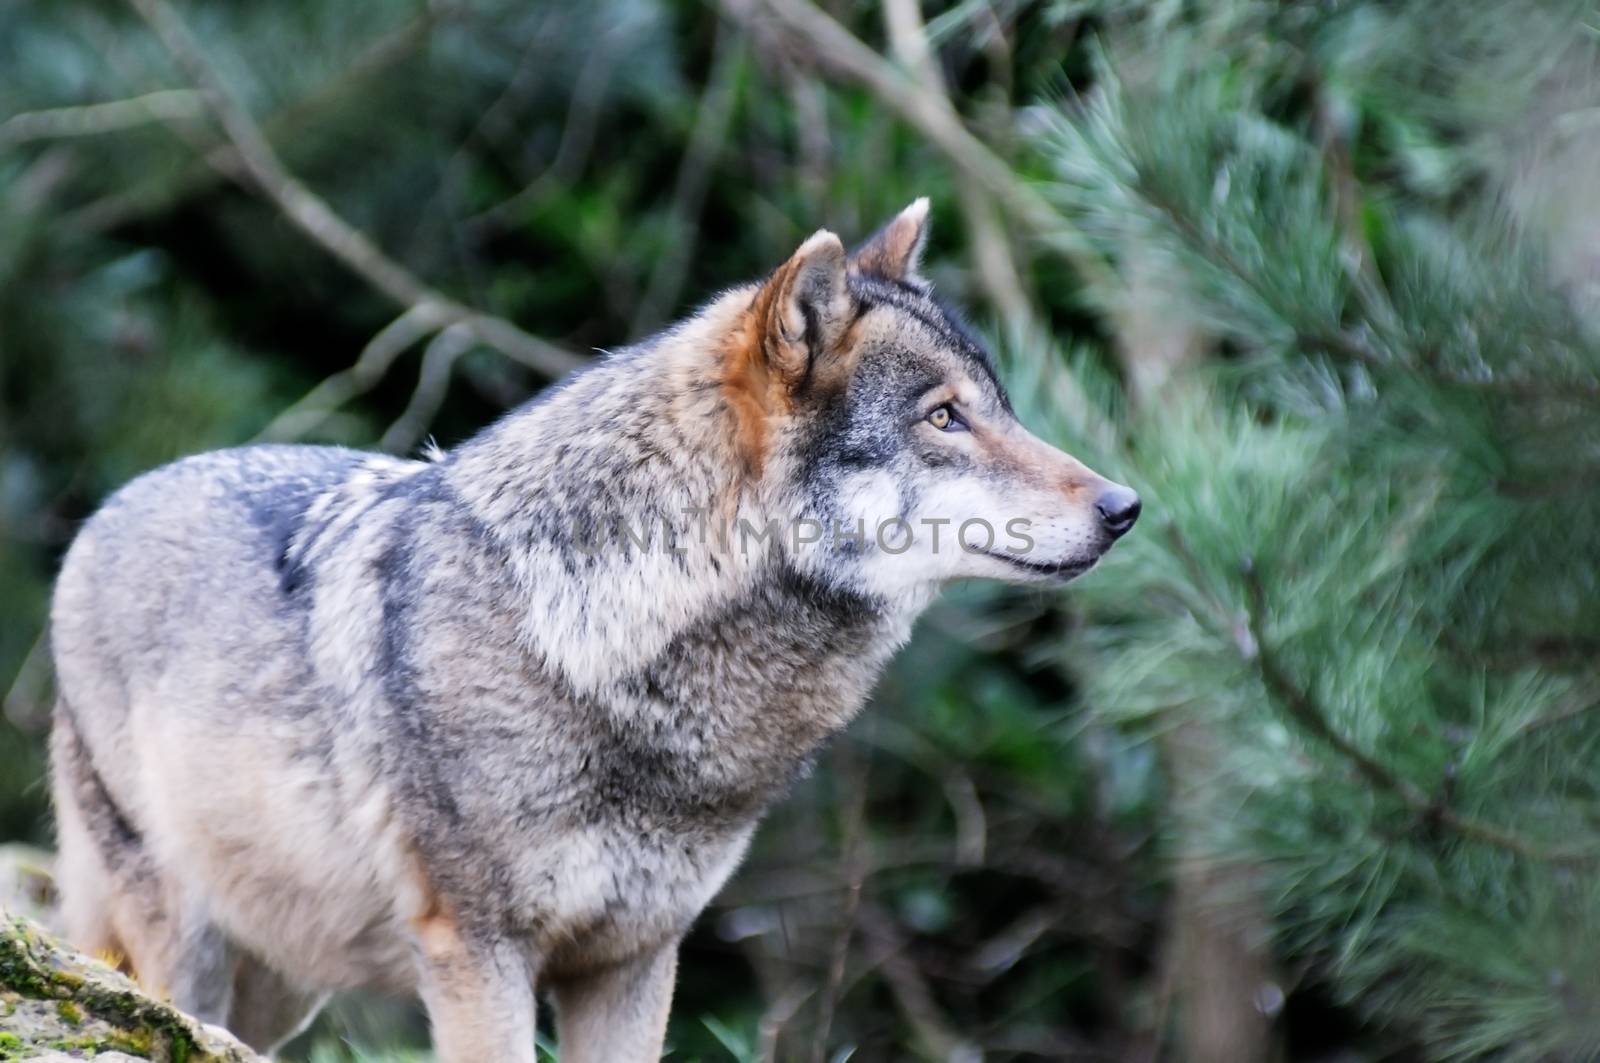 Lone wolf by kmwphotography